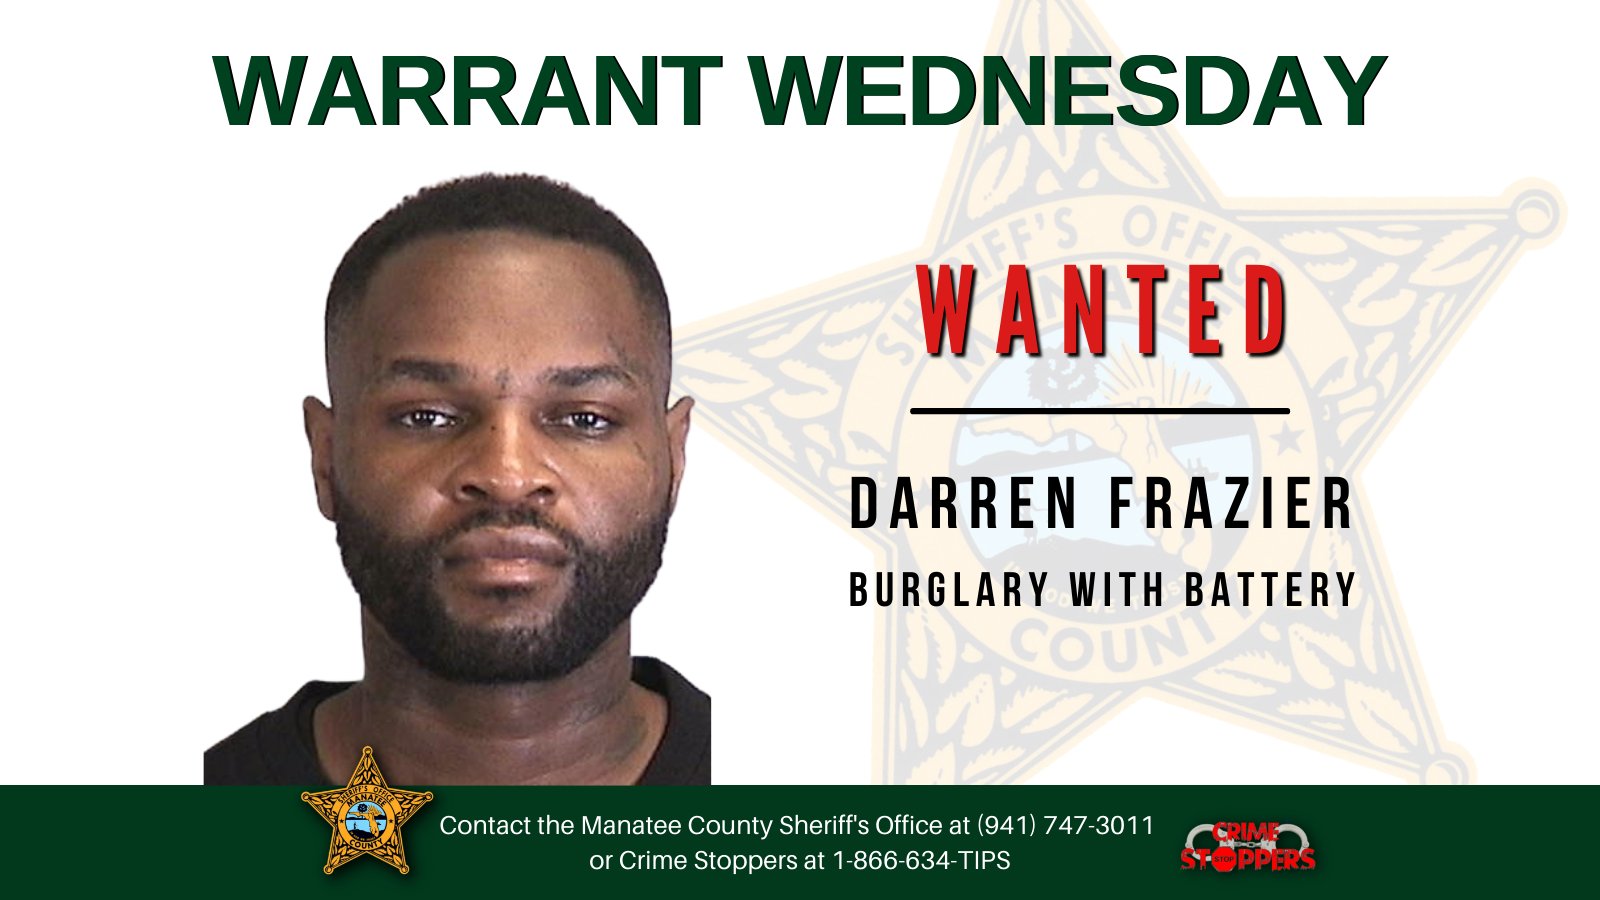 Manatee Sheriff on Twitter: "Darren Frazier is wanted for Burglary with  Battery. If you've seen him, please call us at (941) 747-3011 or Crime  Stoppers at 1-866-634-TIPS. #WarrantWednesday #Wanted  https://t.co/h2jzyVRArW" / Twitter